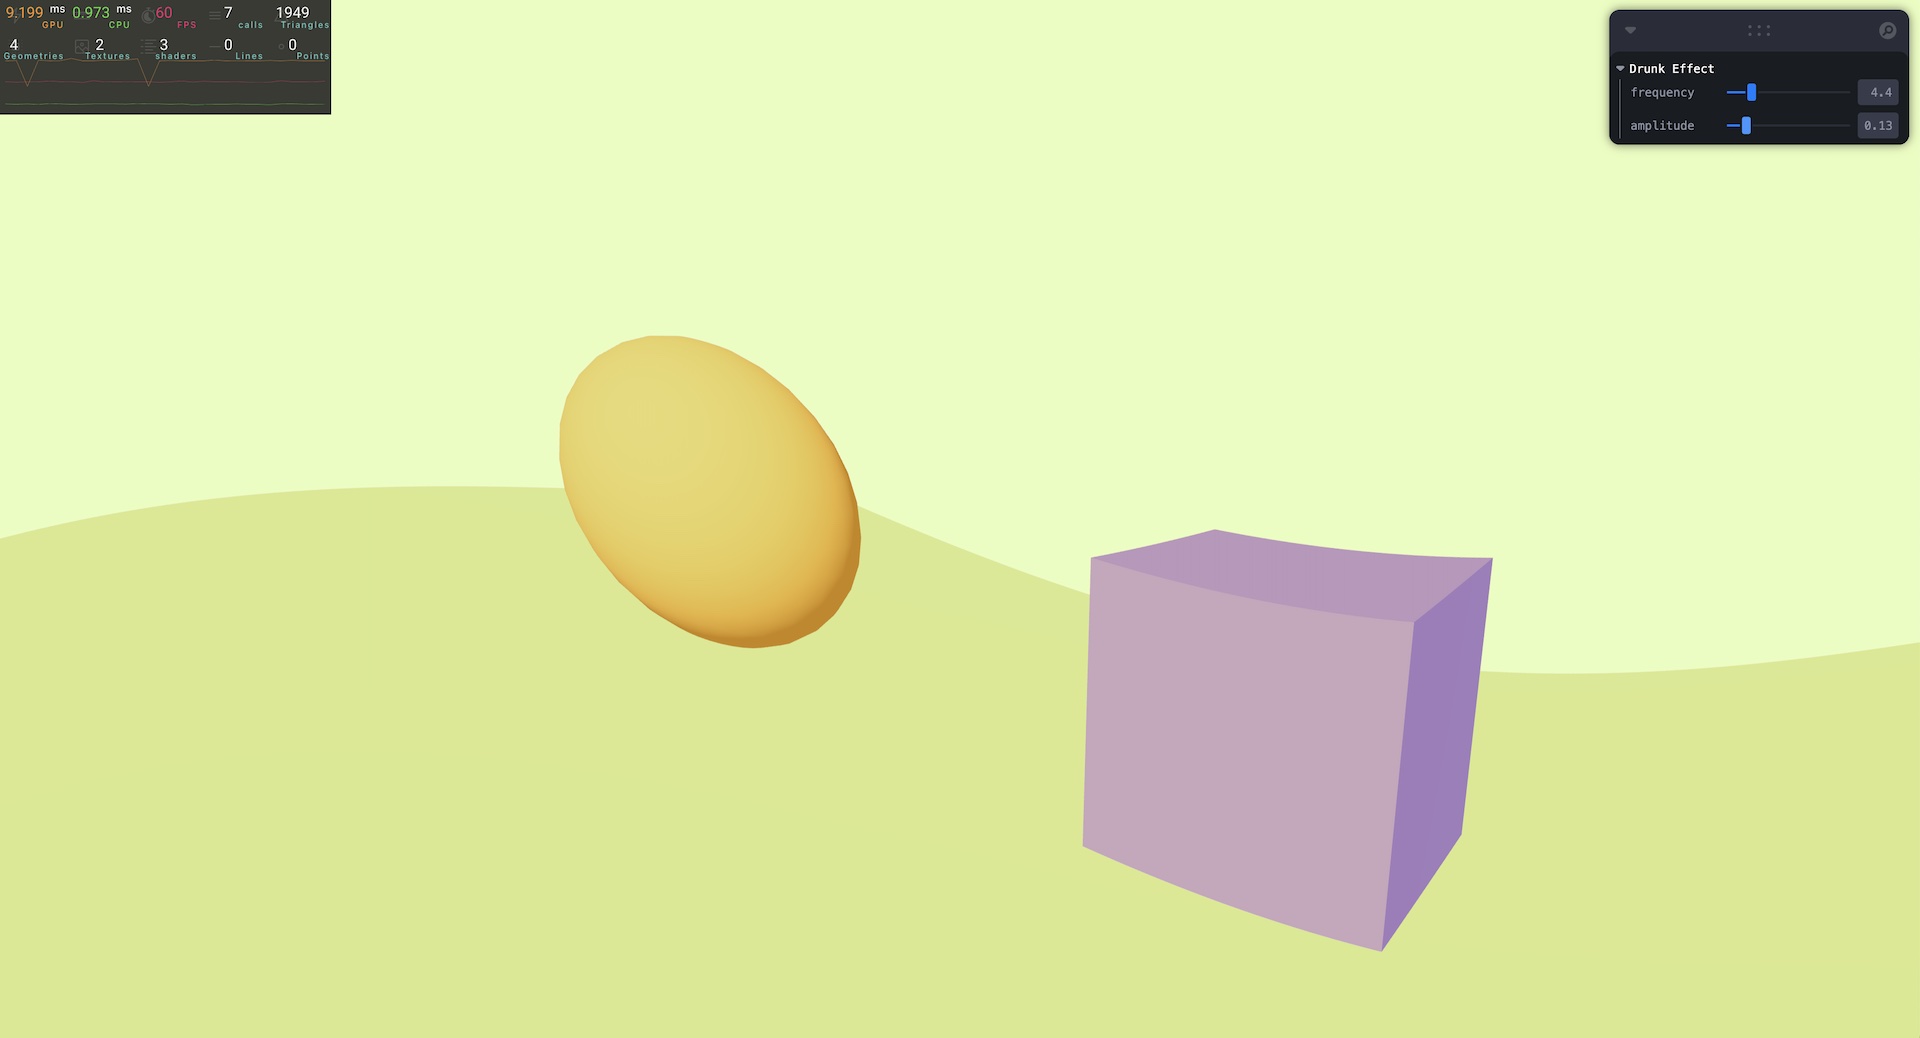 A 3D rendering of a ball and a cube under the influence of a 'Drunk Effect' post-processing filter, evidenced by on-screen sliders for frequency and amplitude adjustments. The ball and cube are resting on a flat surface with a light green background. The ball appears distorted into an egg shape, and the cube has a slightly skewed form, demonstrating the effects of the filter on simple geometric shapes.